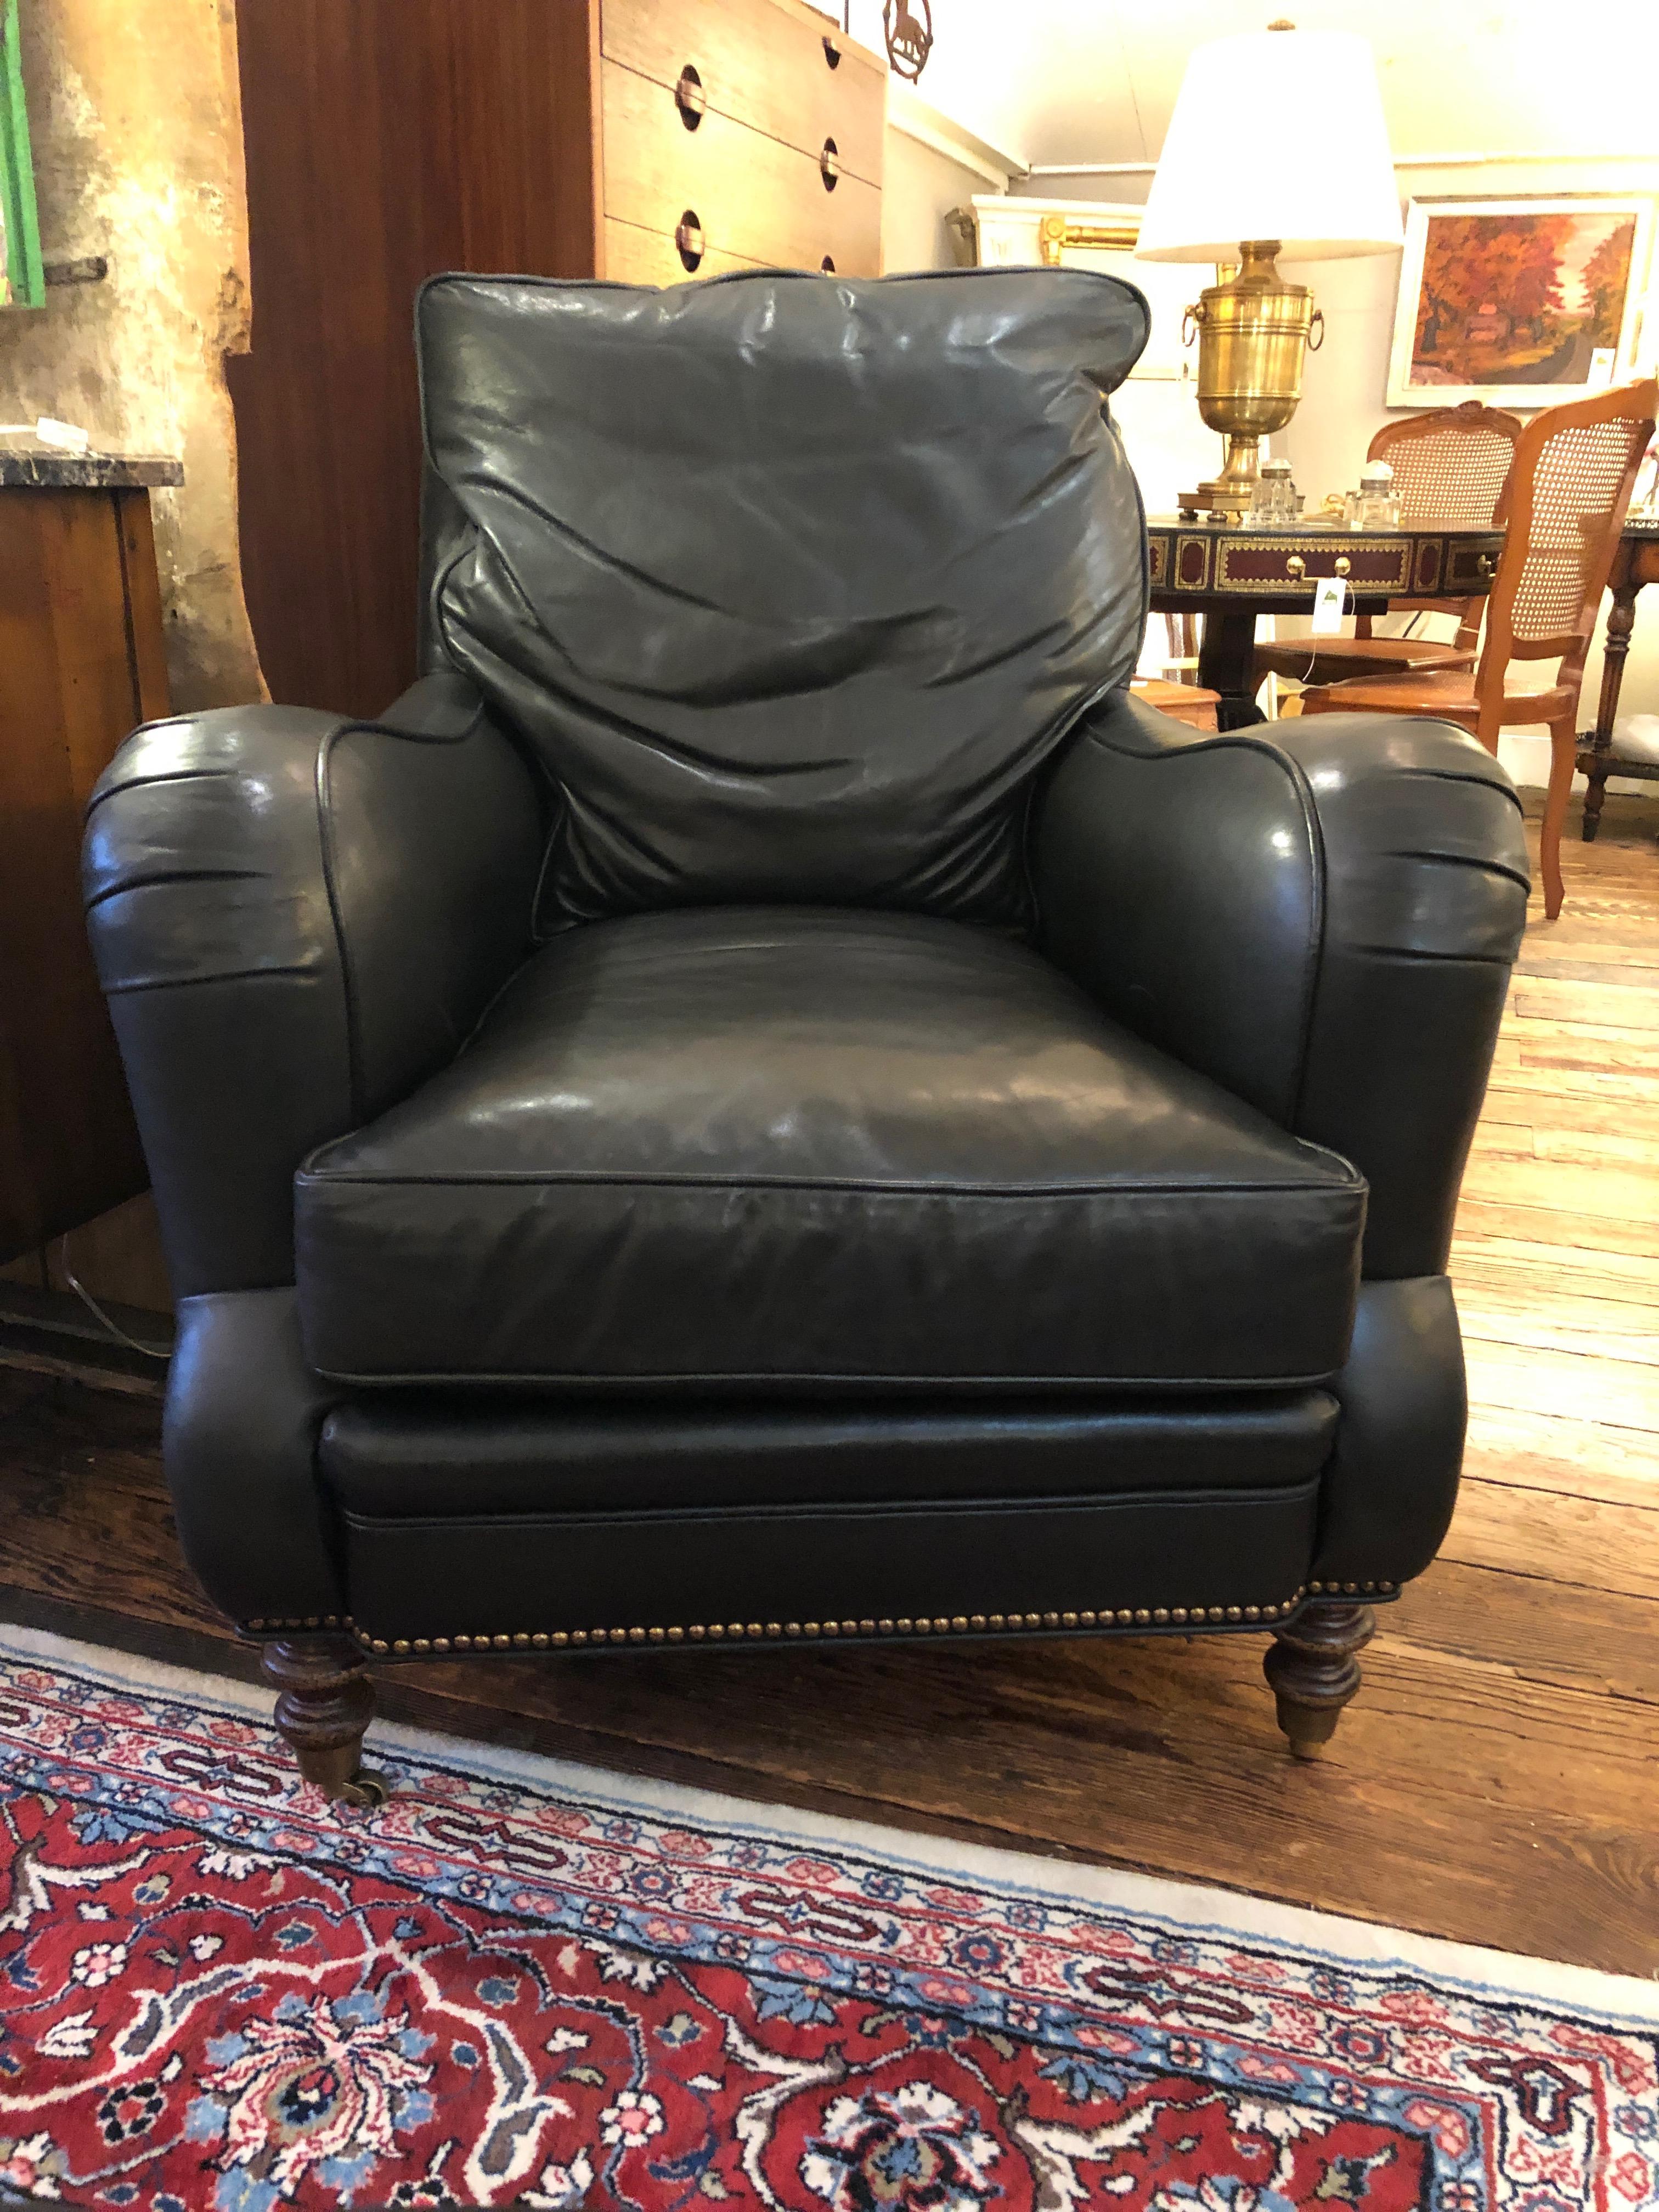 Super comfortable dark charcoal leather club chair and matching ottoman having scroll arms, mahogany turned feet, and handsome brass nailheads. Back cushion is attached; seat is removable.
Label reads Wesley Hall
Seat height 18.75
seat depth